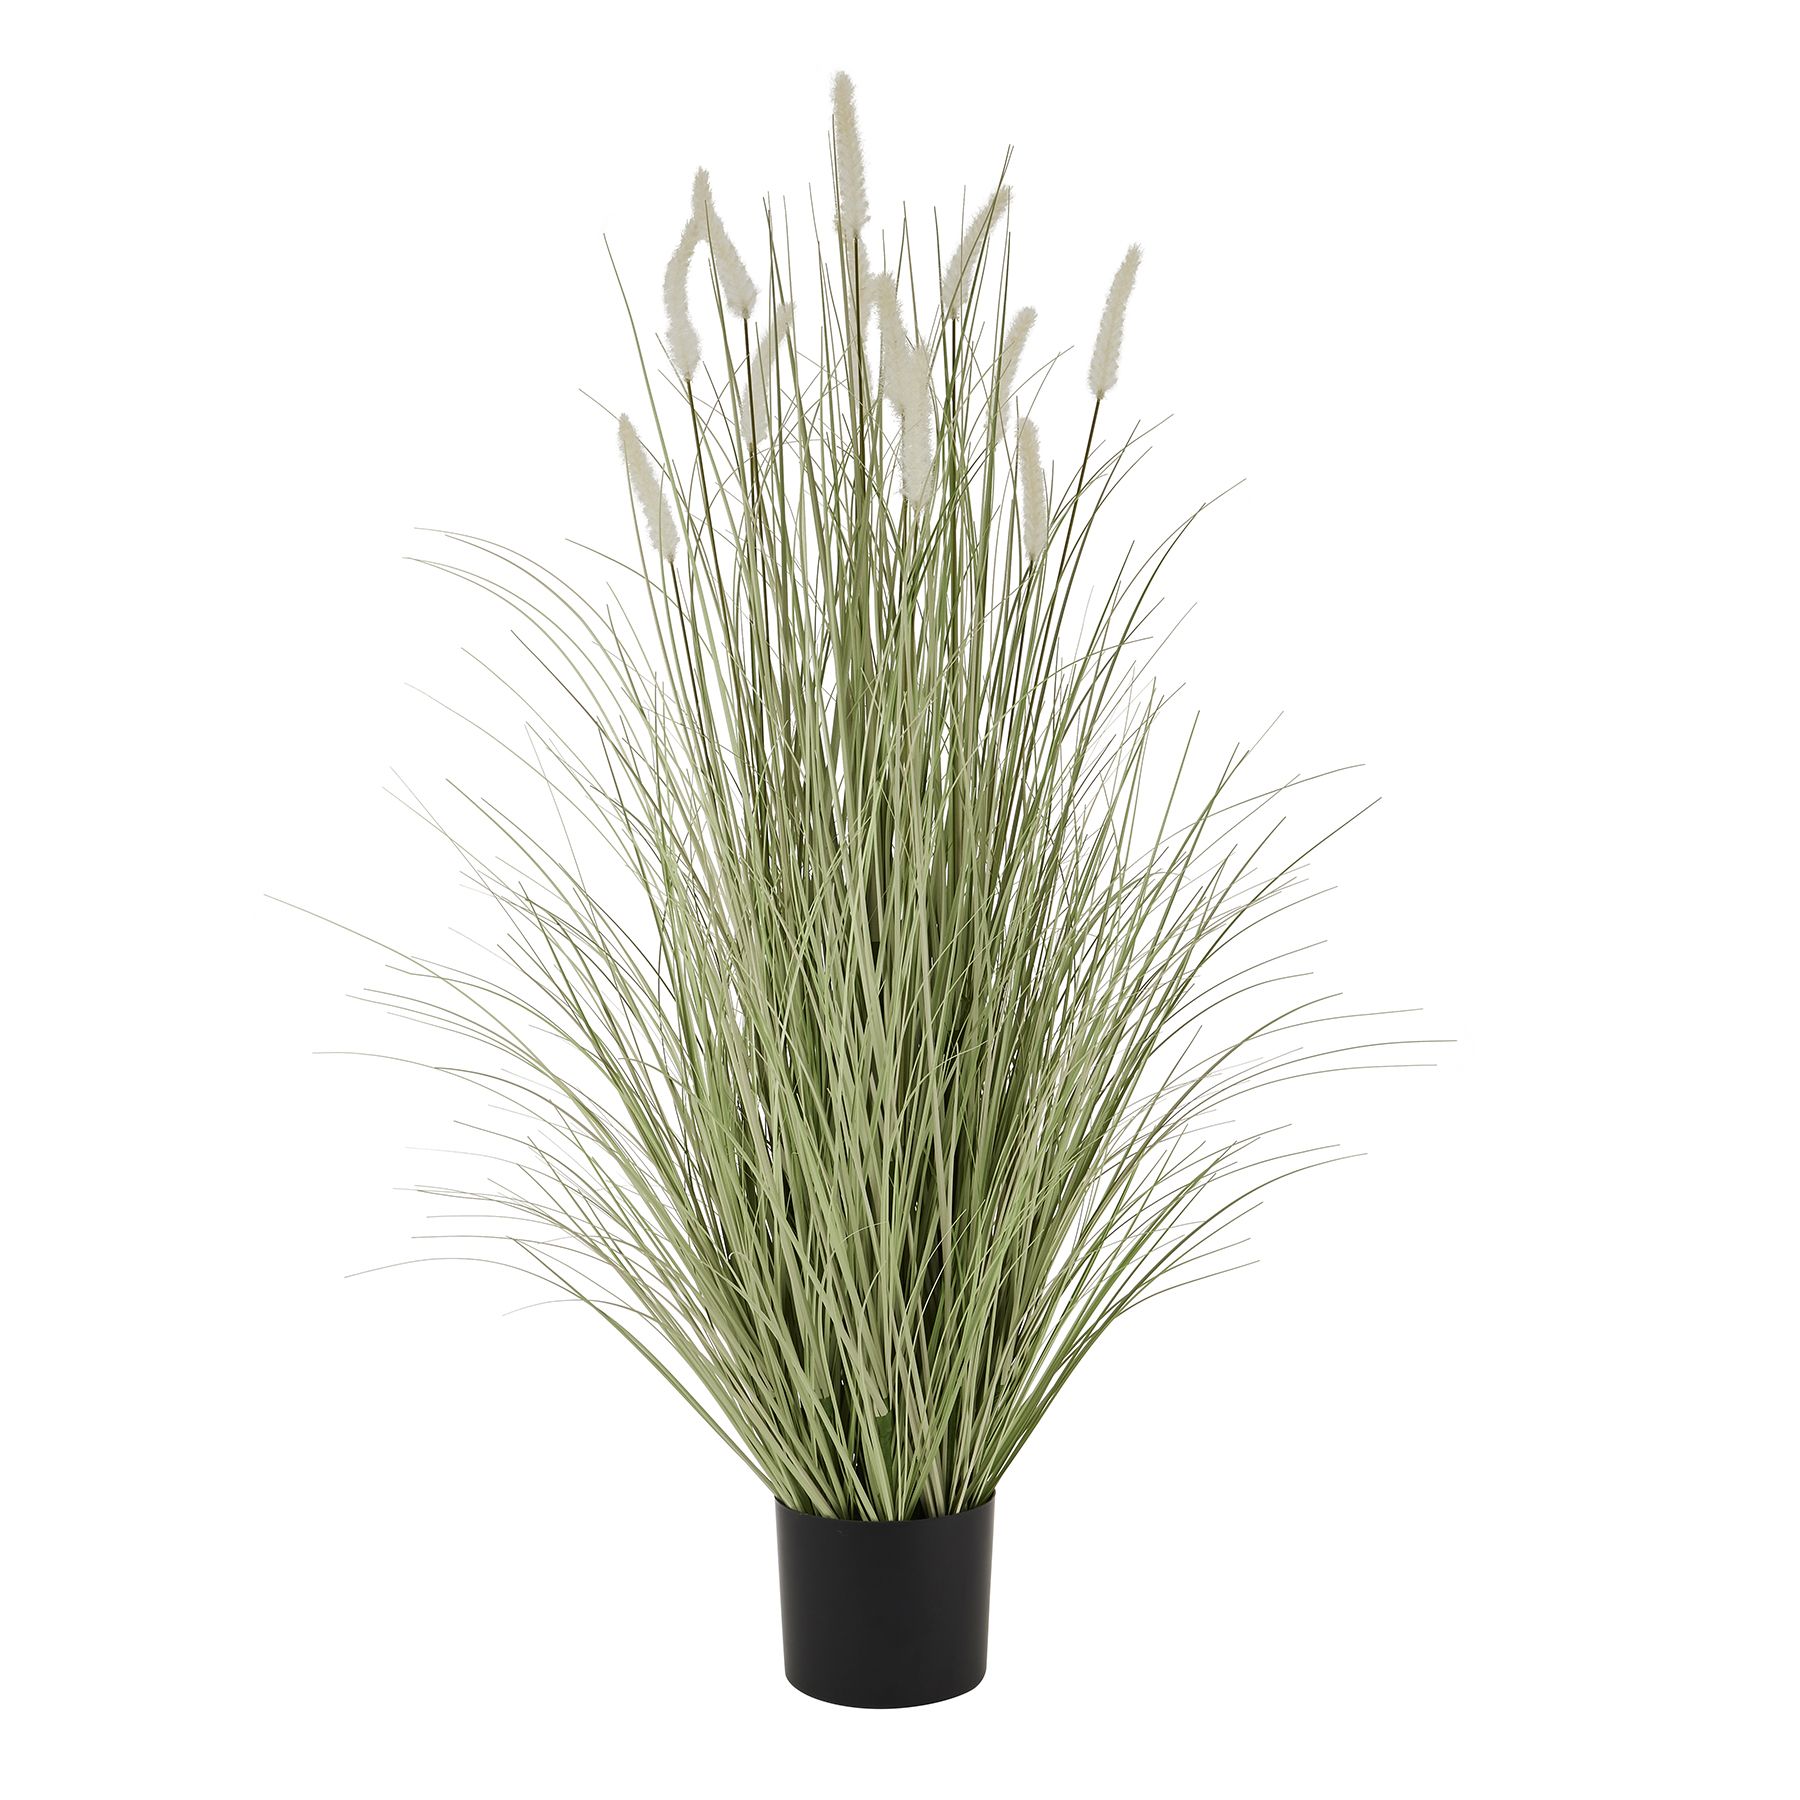 Large Bunny Tail Grass - Image 1